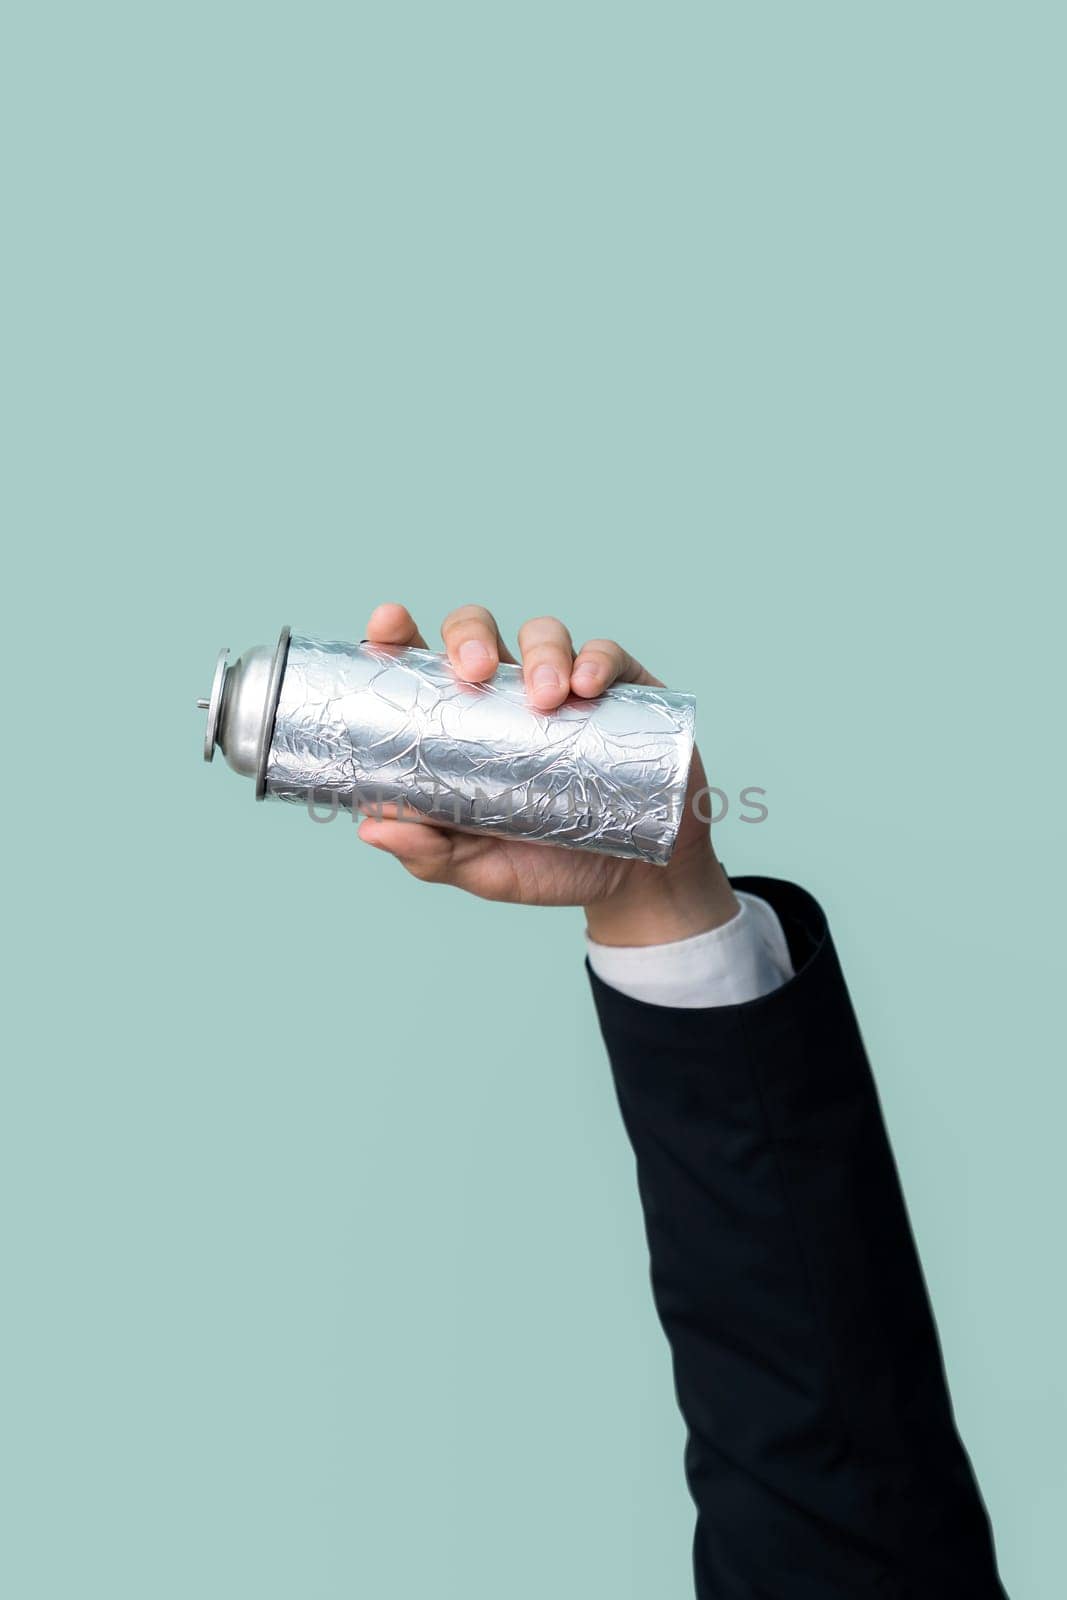 Businessman's hand holding spray can on isolated background. Eco-business recycle waste policy in corporate responsibility. Reuse, reduce and recycle for sustainability environment. Quaint